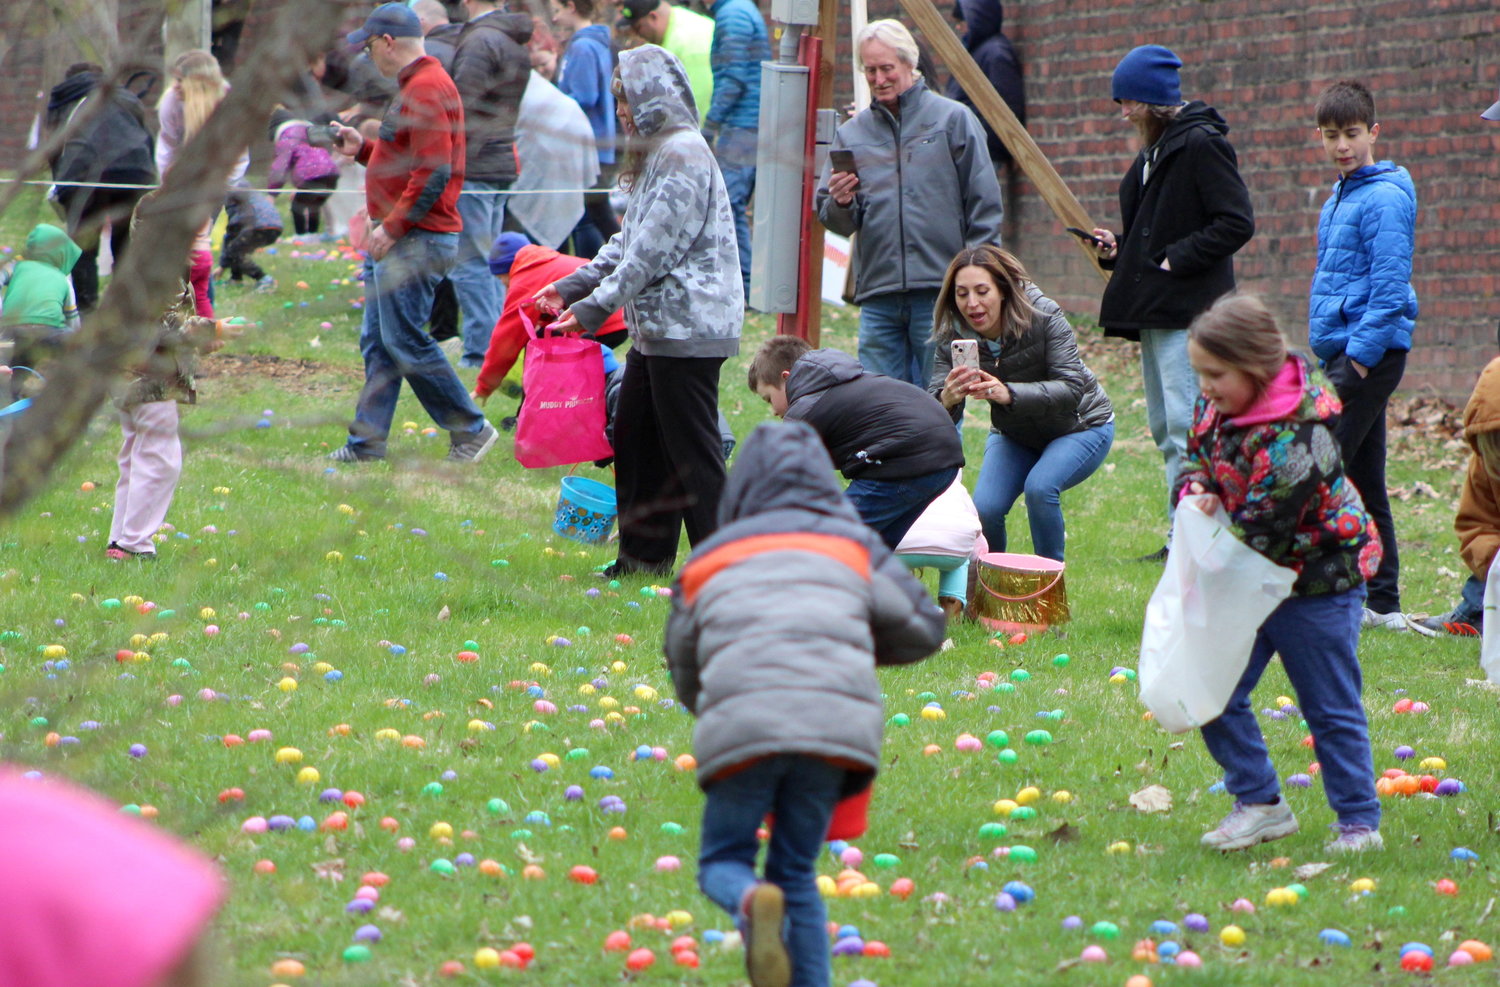 Dozens of egg seekers in the 5-and-under category sprint to grab as many Easter eggs as possible Saturday.